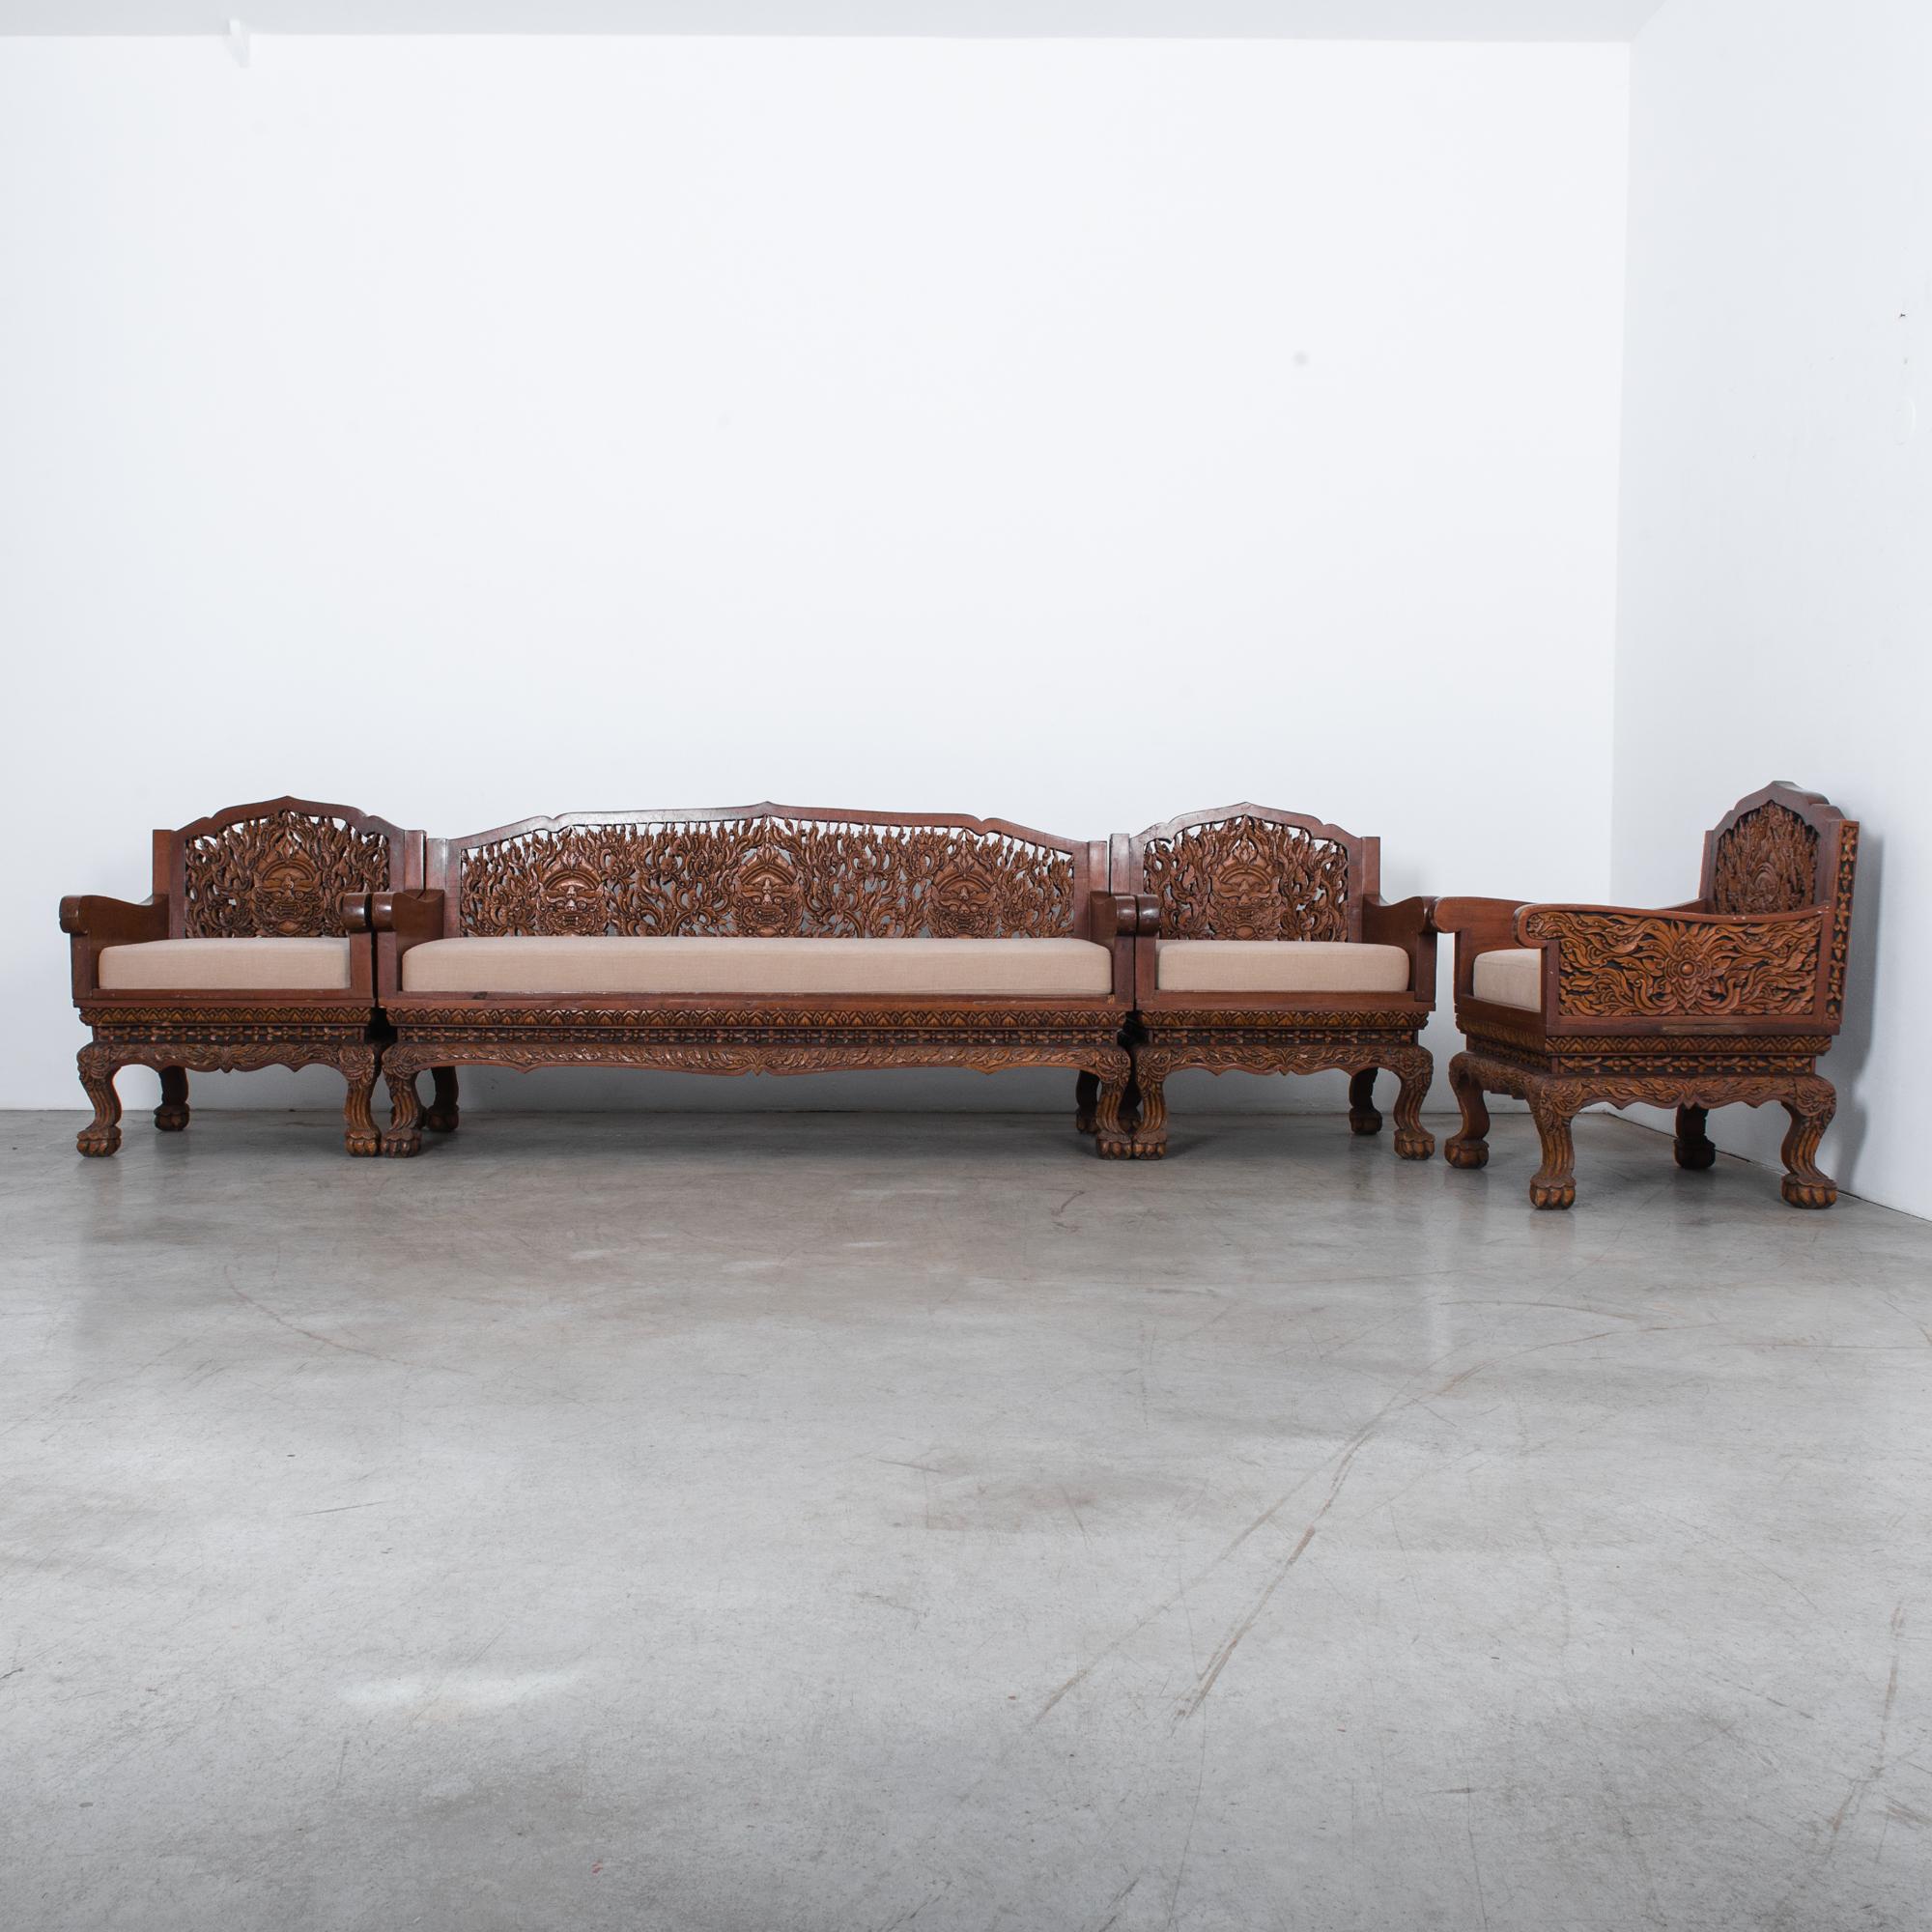 Intricately carved sofa set found in an orientalist style Belgian carriage house. From circa 1920s Southeast Asia, carved from dense rosewood and re-upholstered in warm cream fabric. This amazing set features stunning graphic relief of dragons face